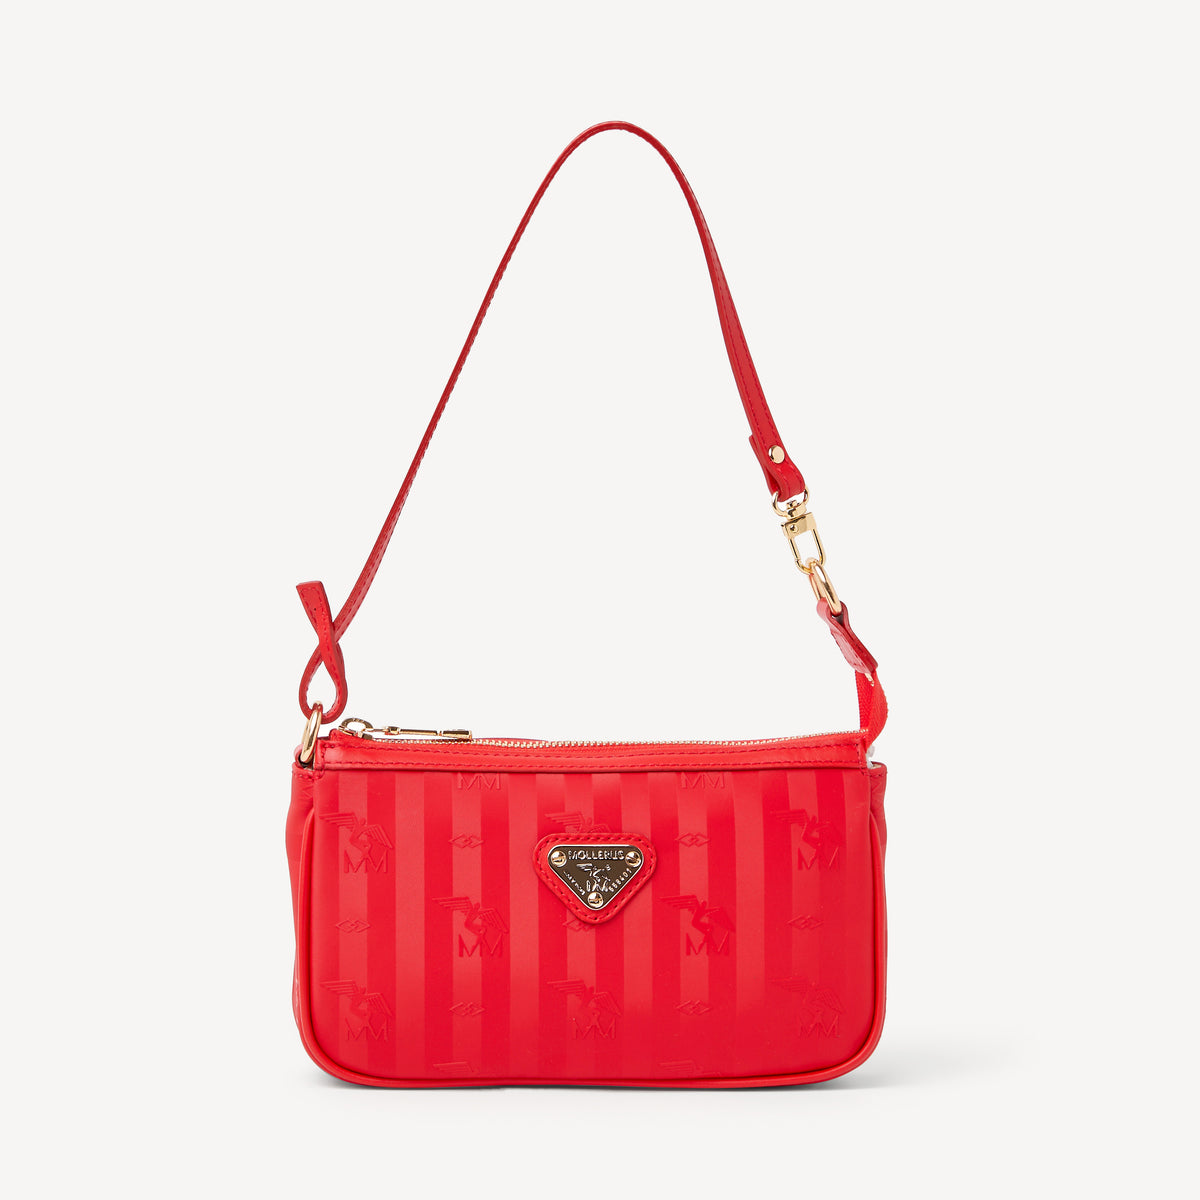 MISSY | Schultertasche cherry rot/gold - frontal